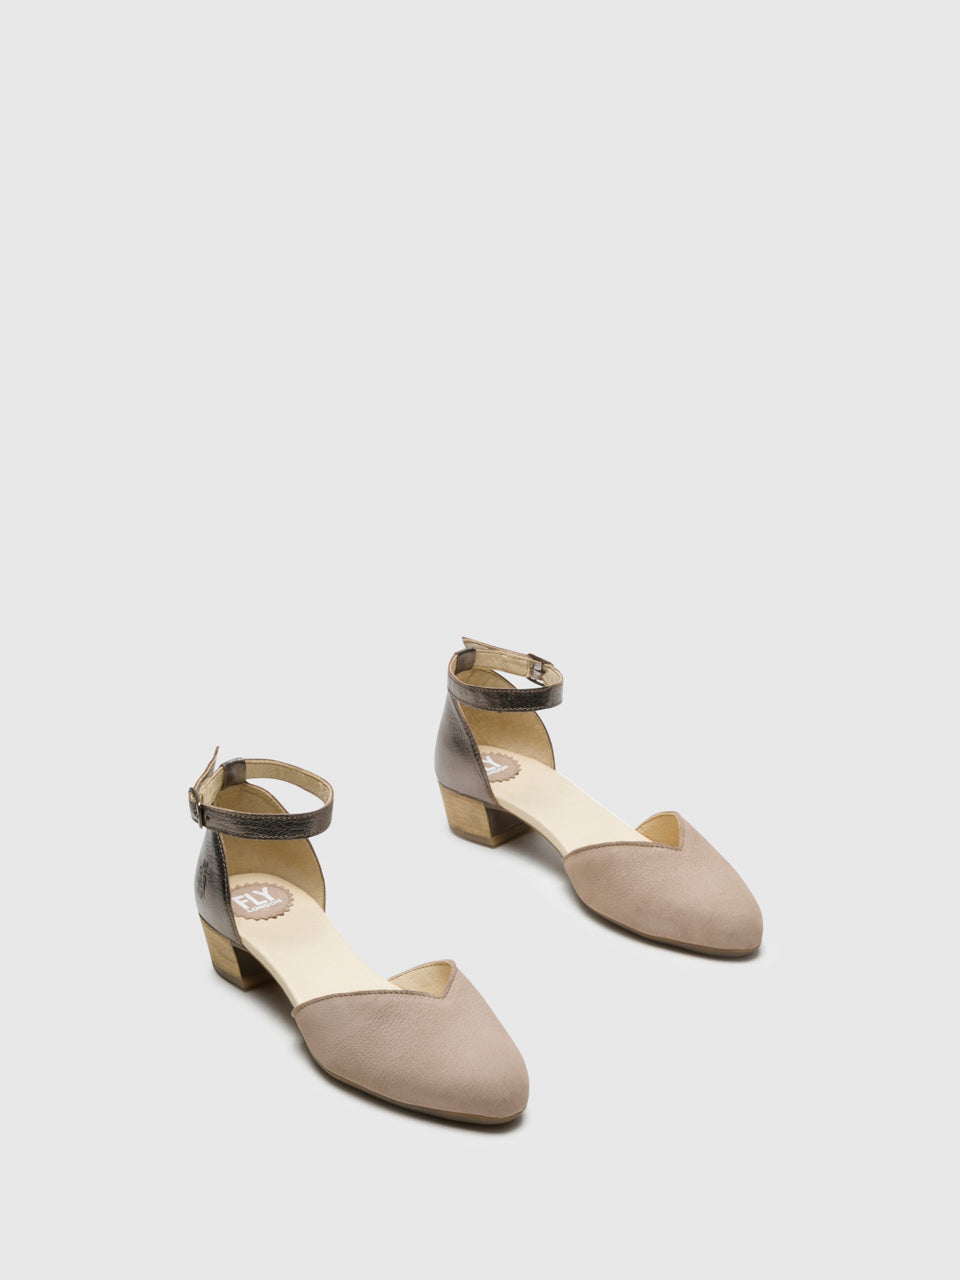 Fly London SandyBrown Ankle Strap Sandals